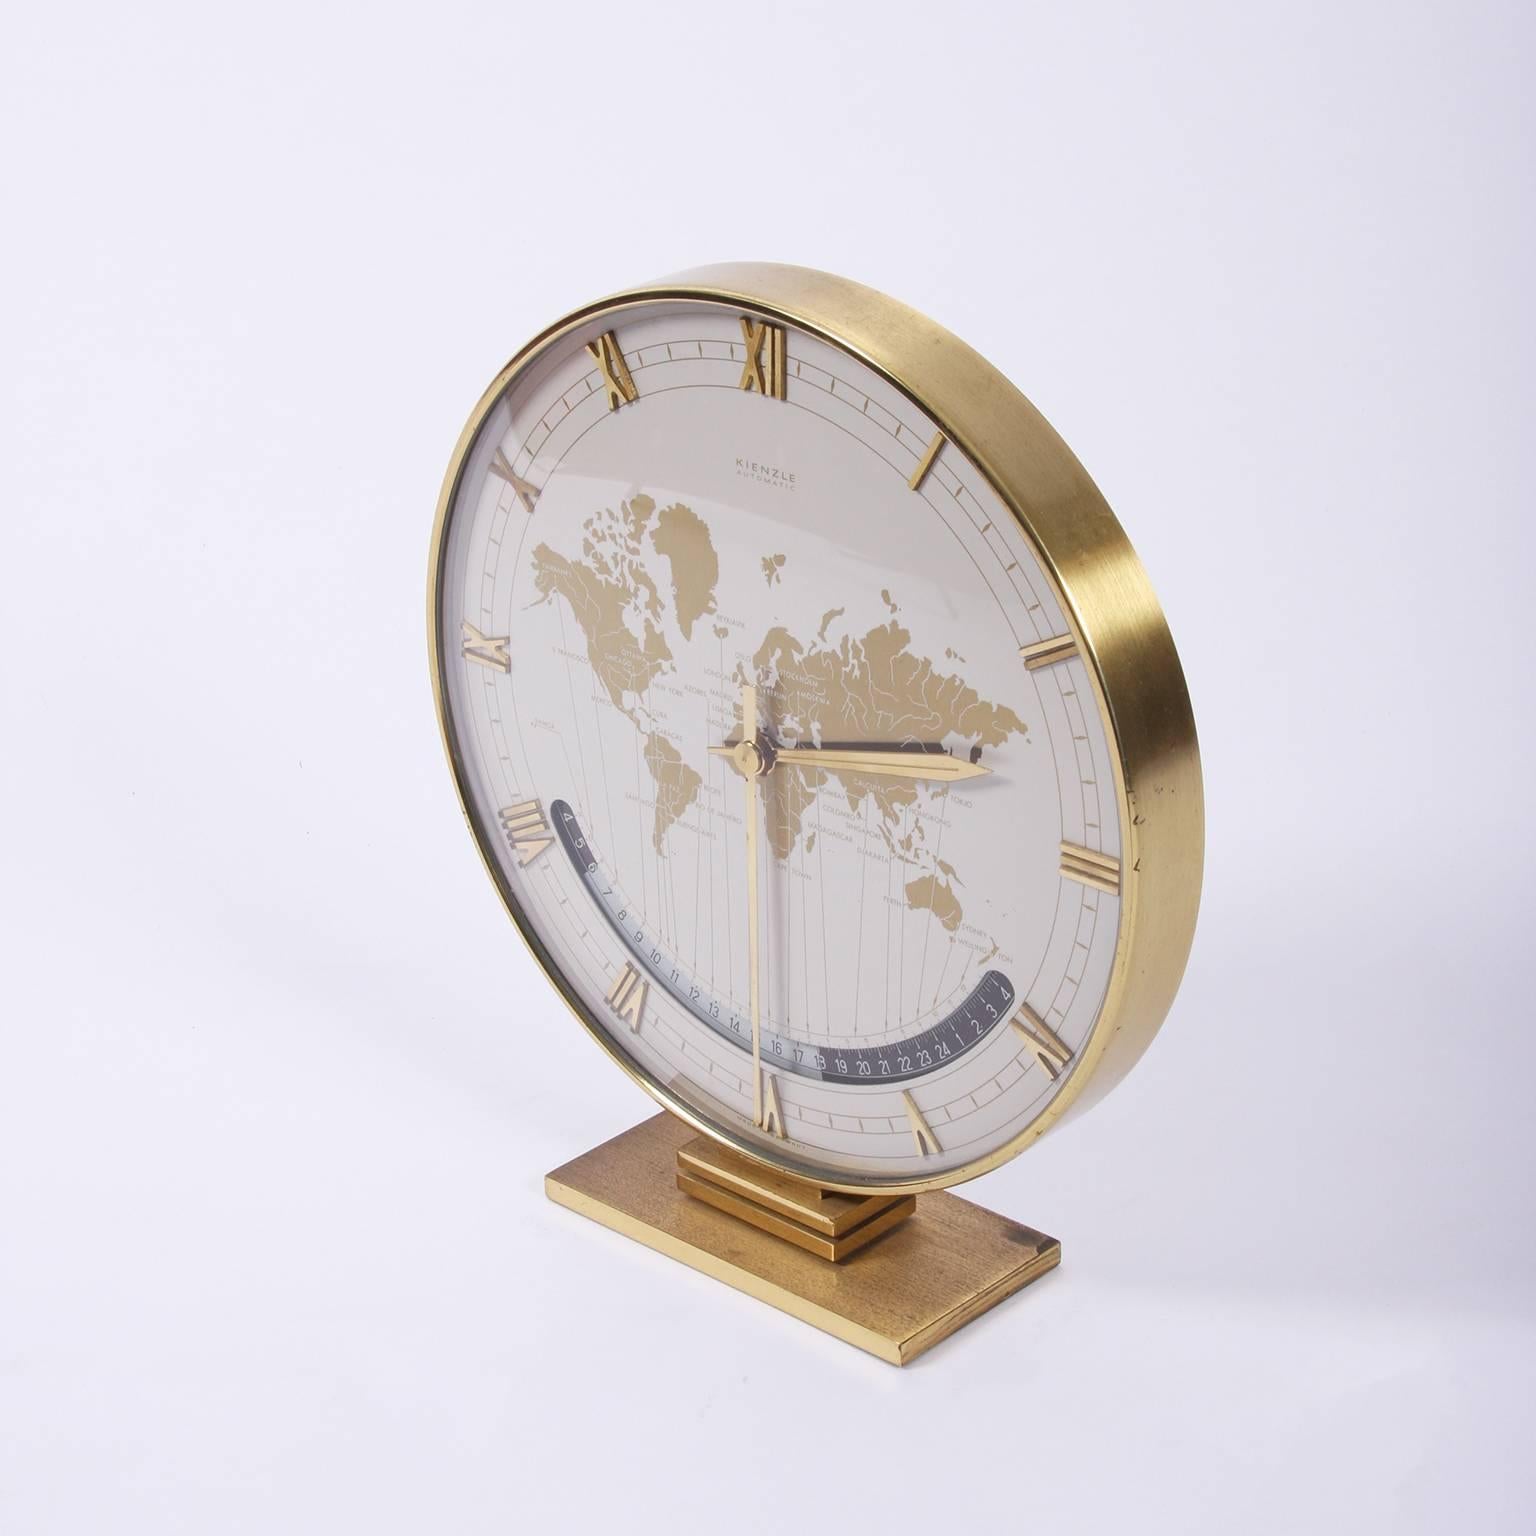 German, circa 1960.

An electric world clock, made by Kienzle with a brass case. Displays the time throughout the world.